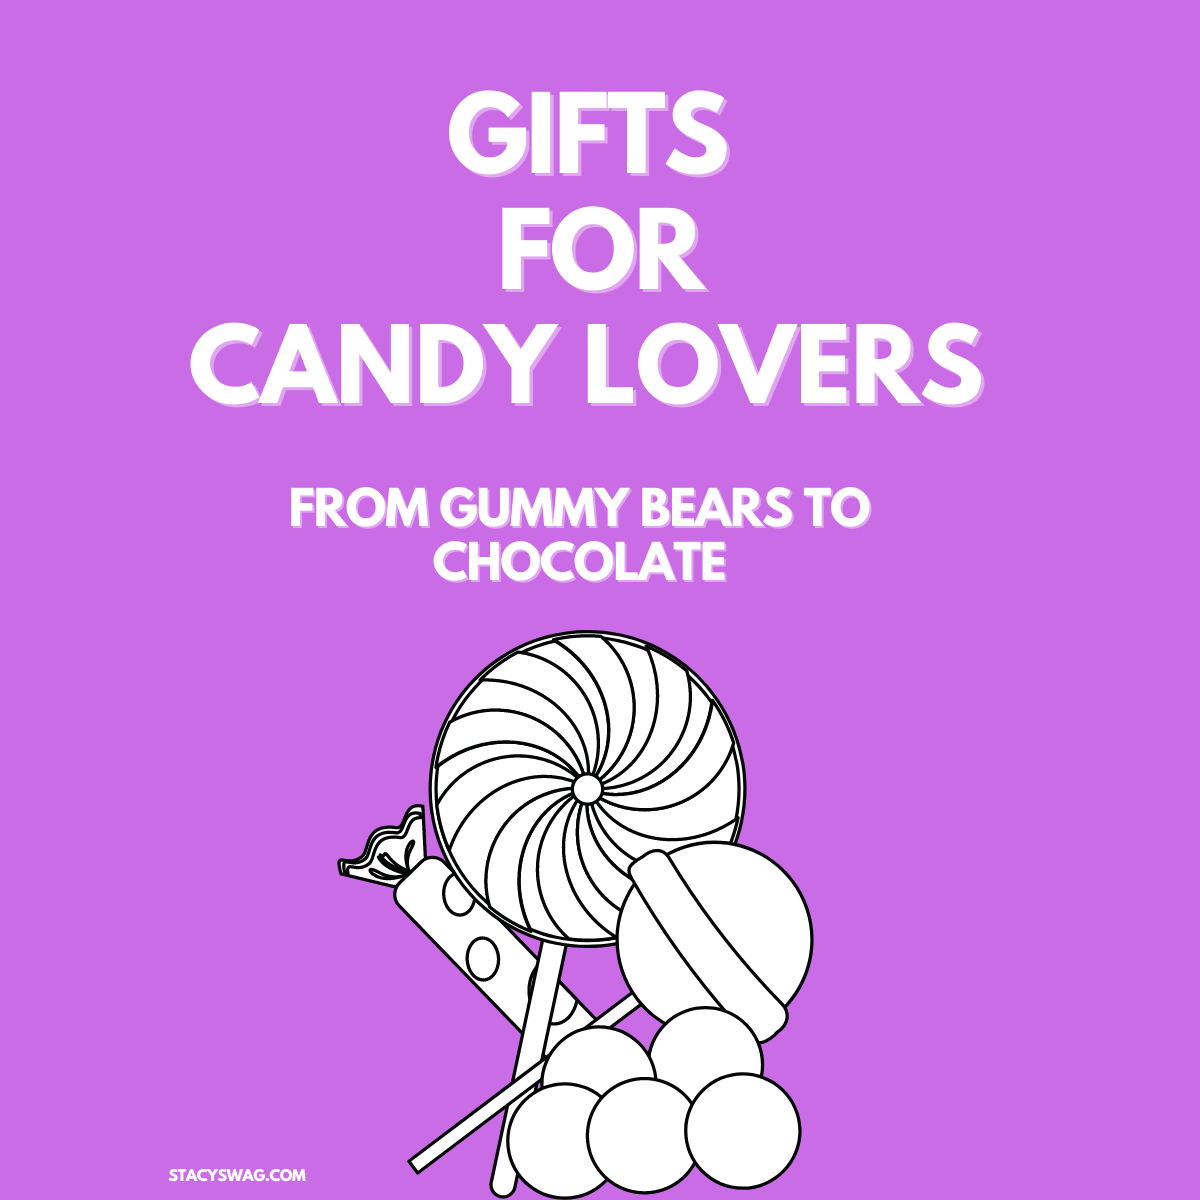 From Gummy Bears to Chocolate, check out these Gifts for Candy Lovers